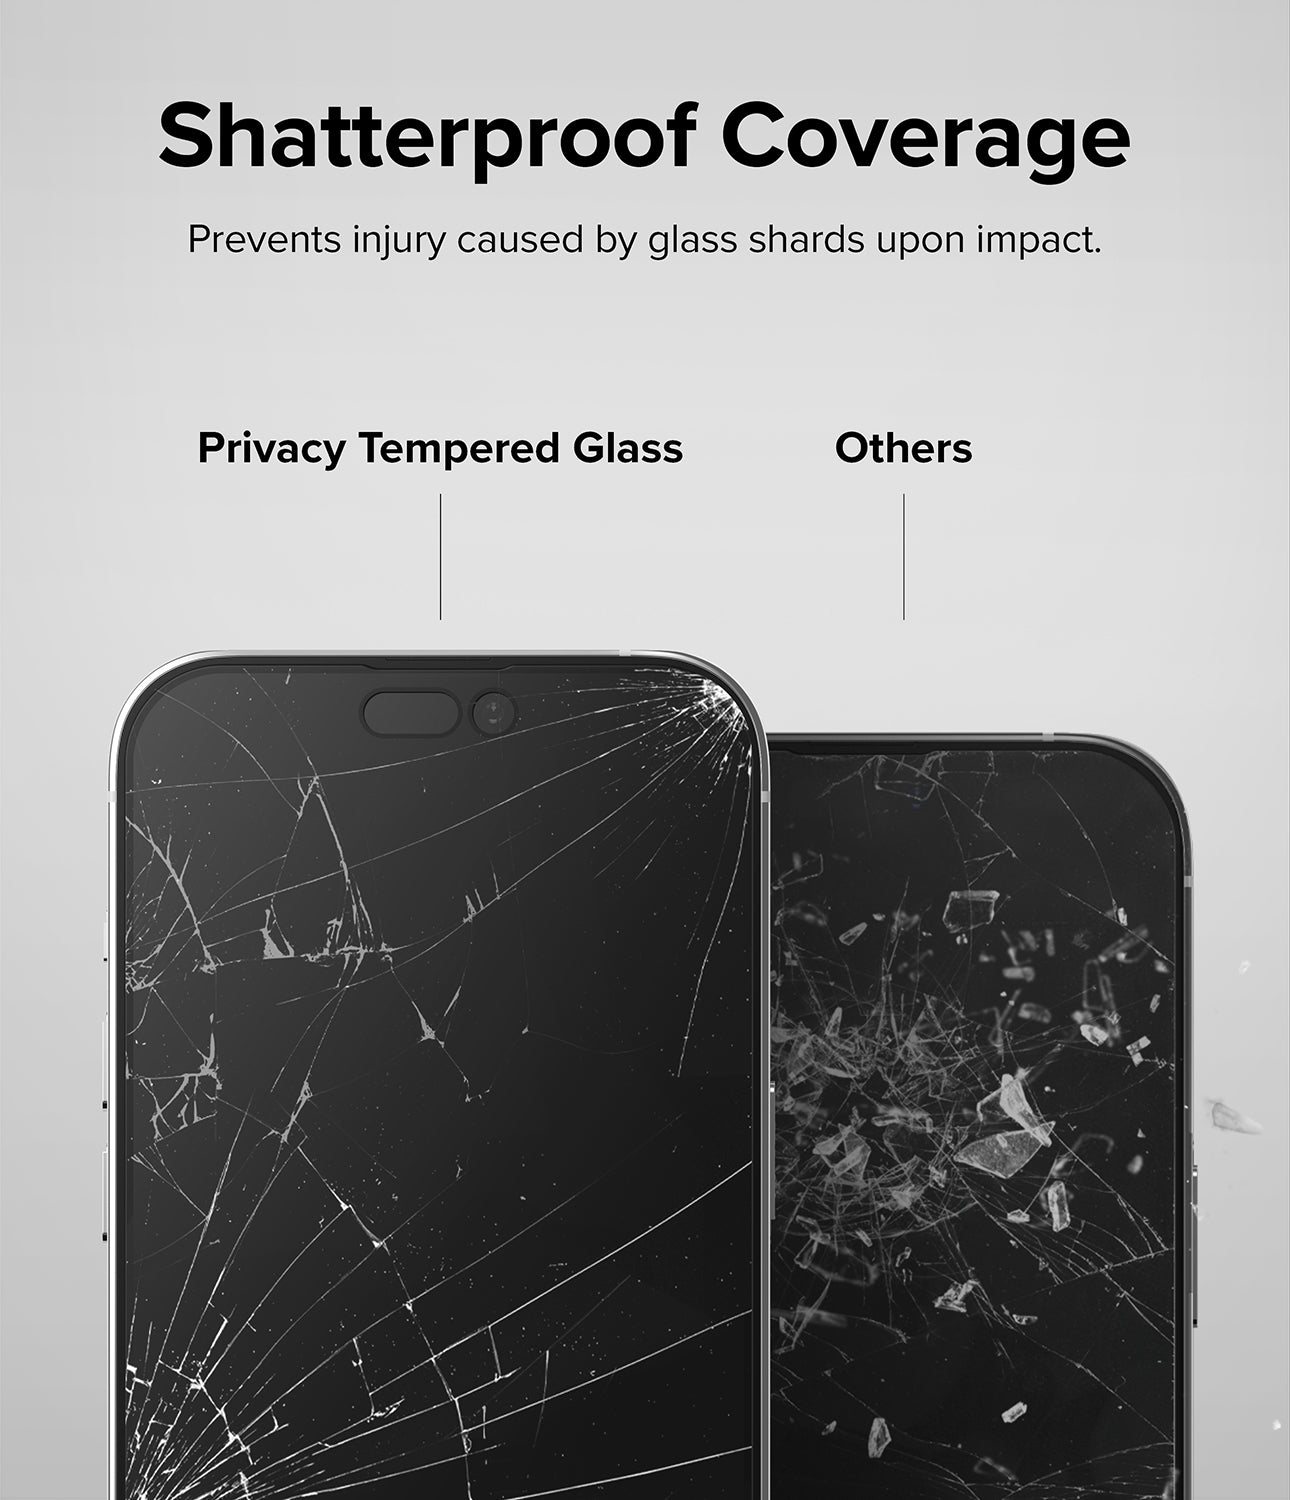 iPhone 14 Pro Screen Protector | Privacy Glass - Shatterproof Coverage. Prevents injury caused by glass shards upon impact.